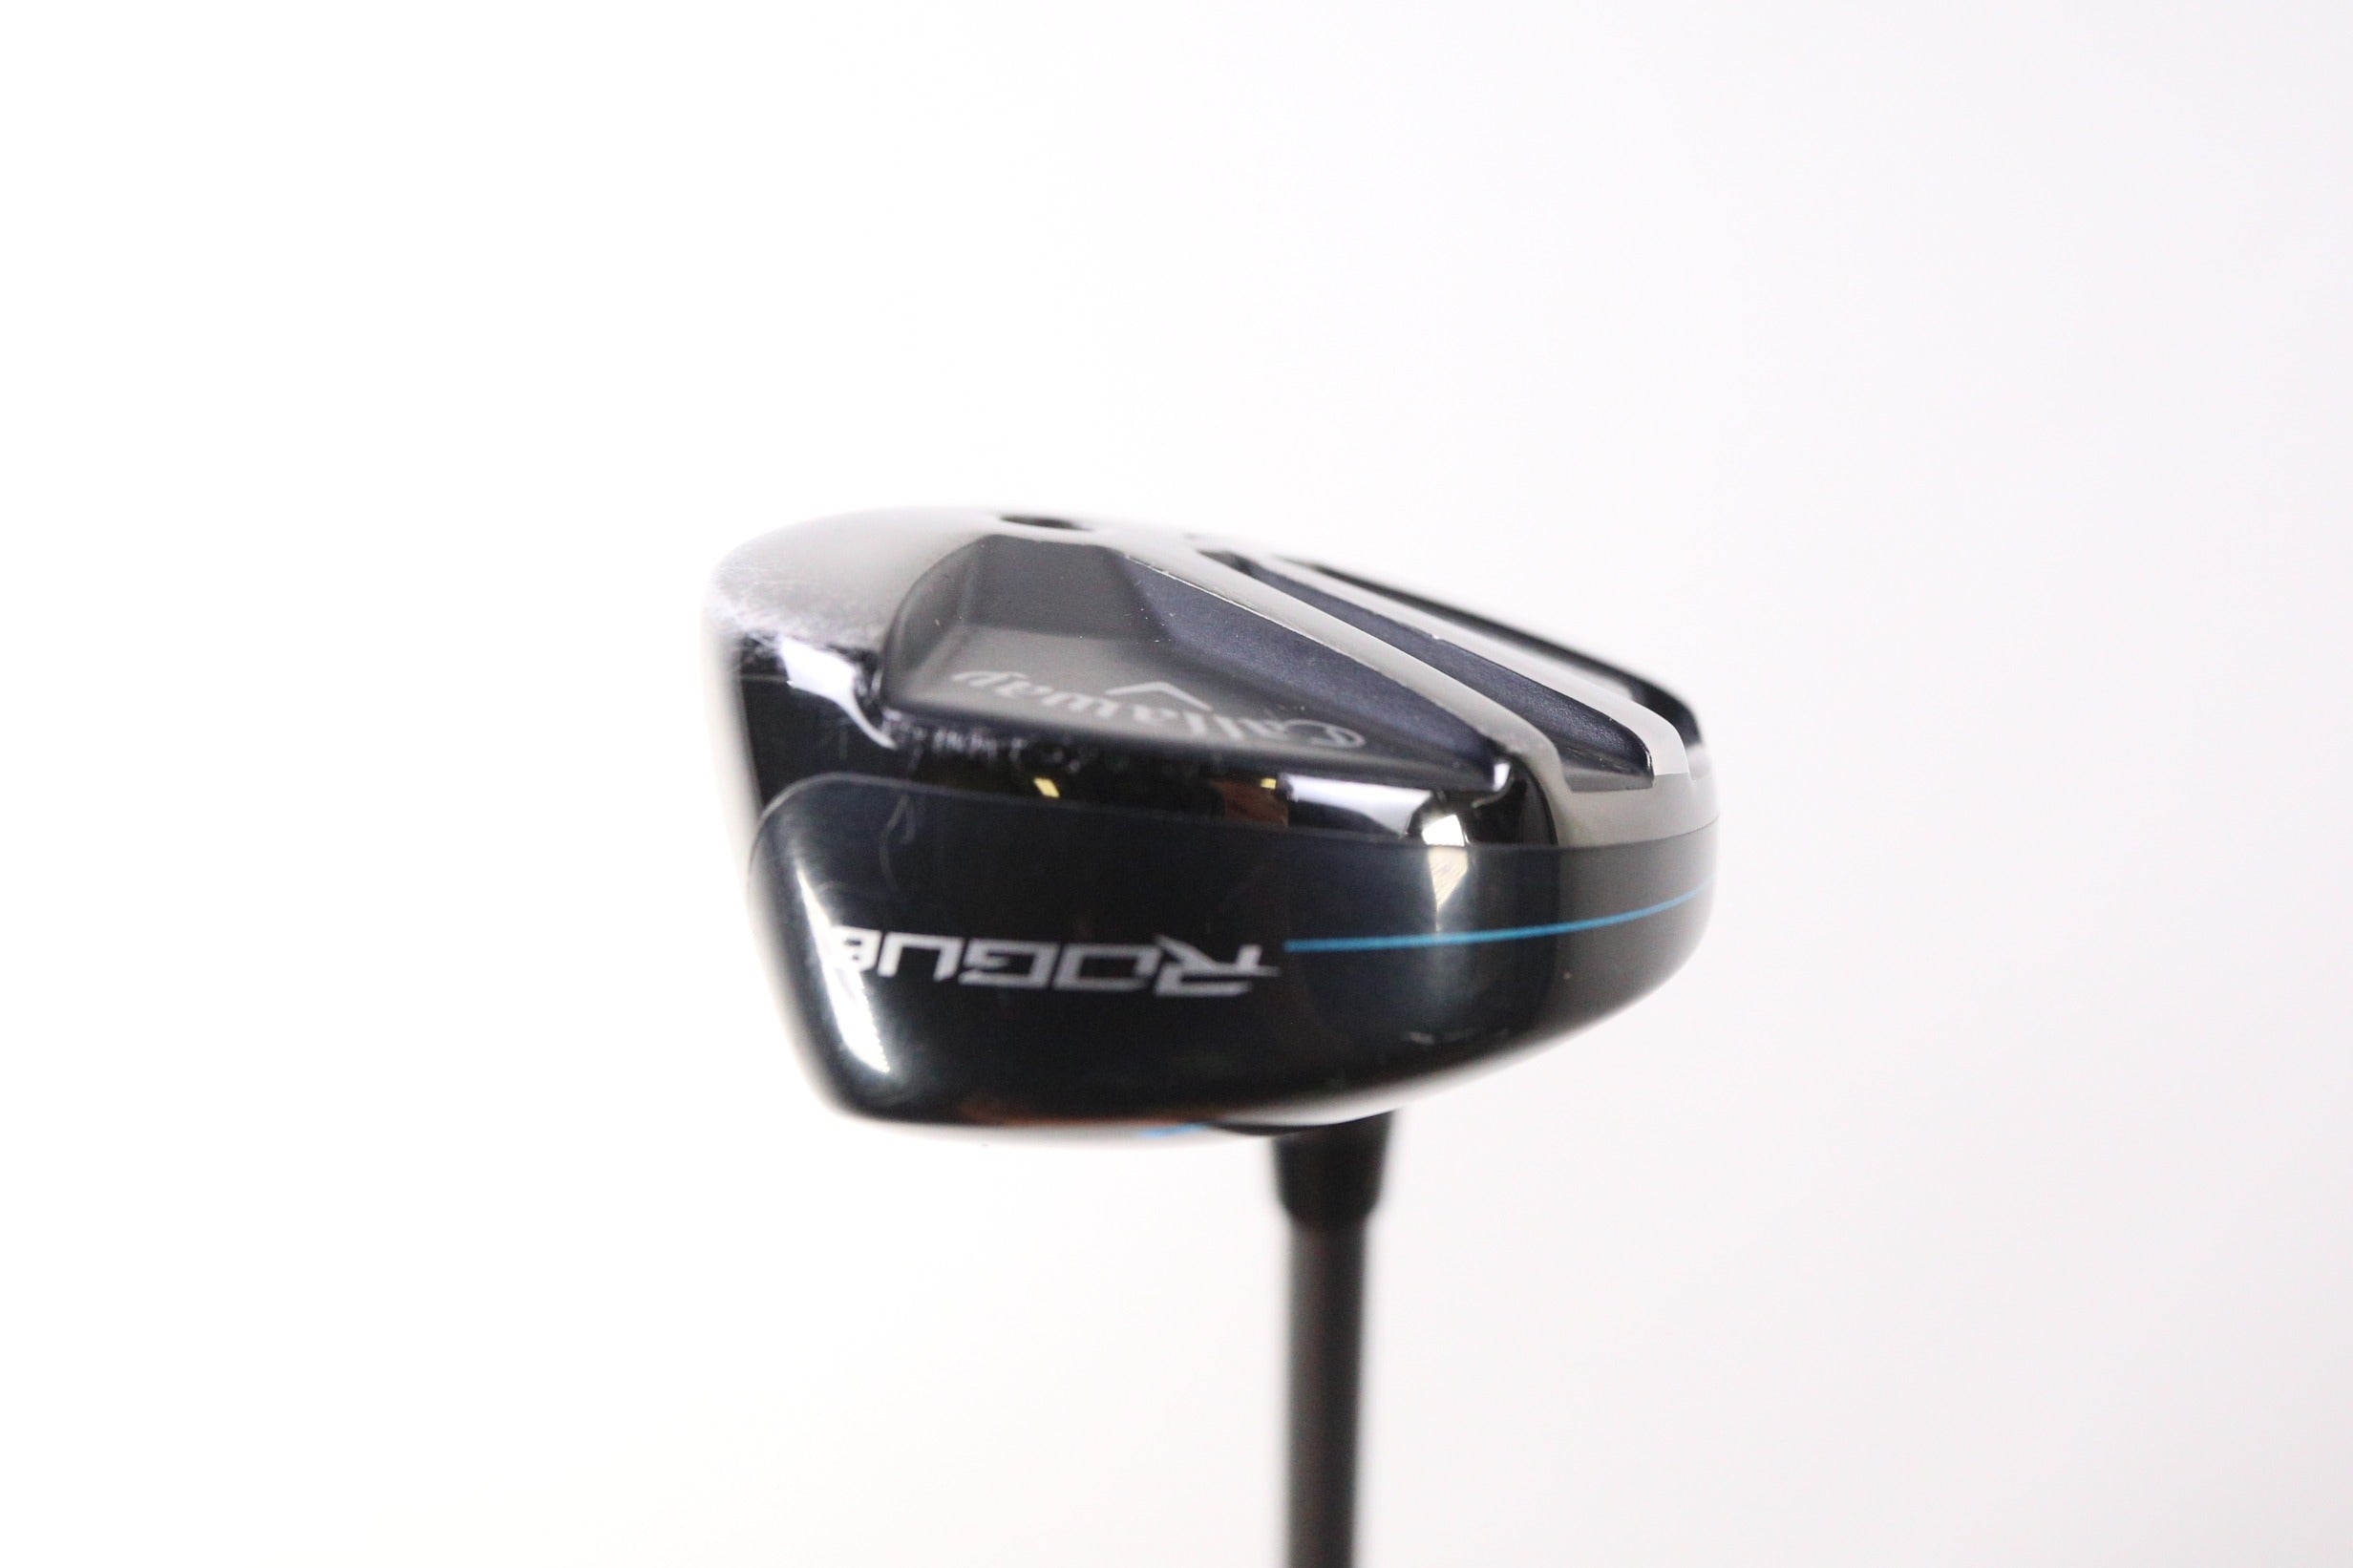 Used Callaway Rogue Right-Handed Hybrid – Next Round